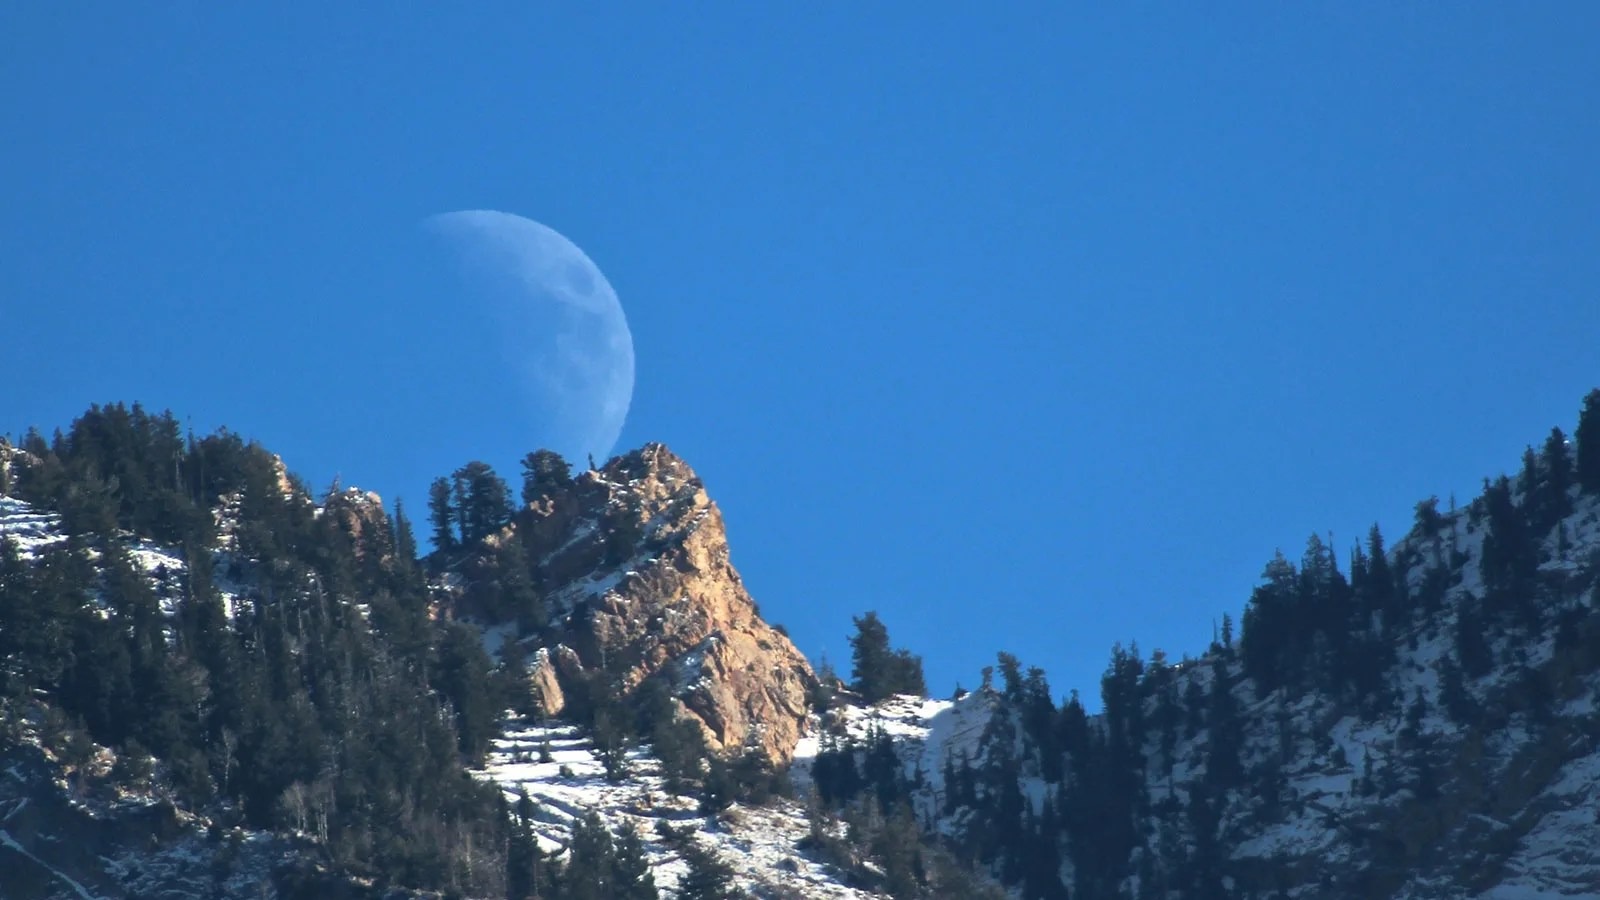 The Moon rises over mountains in Utah. Credit: NASA/Bill Dunford.